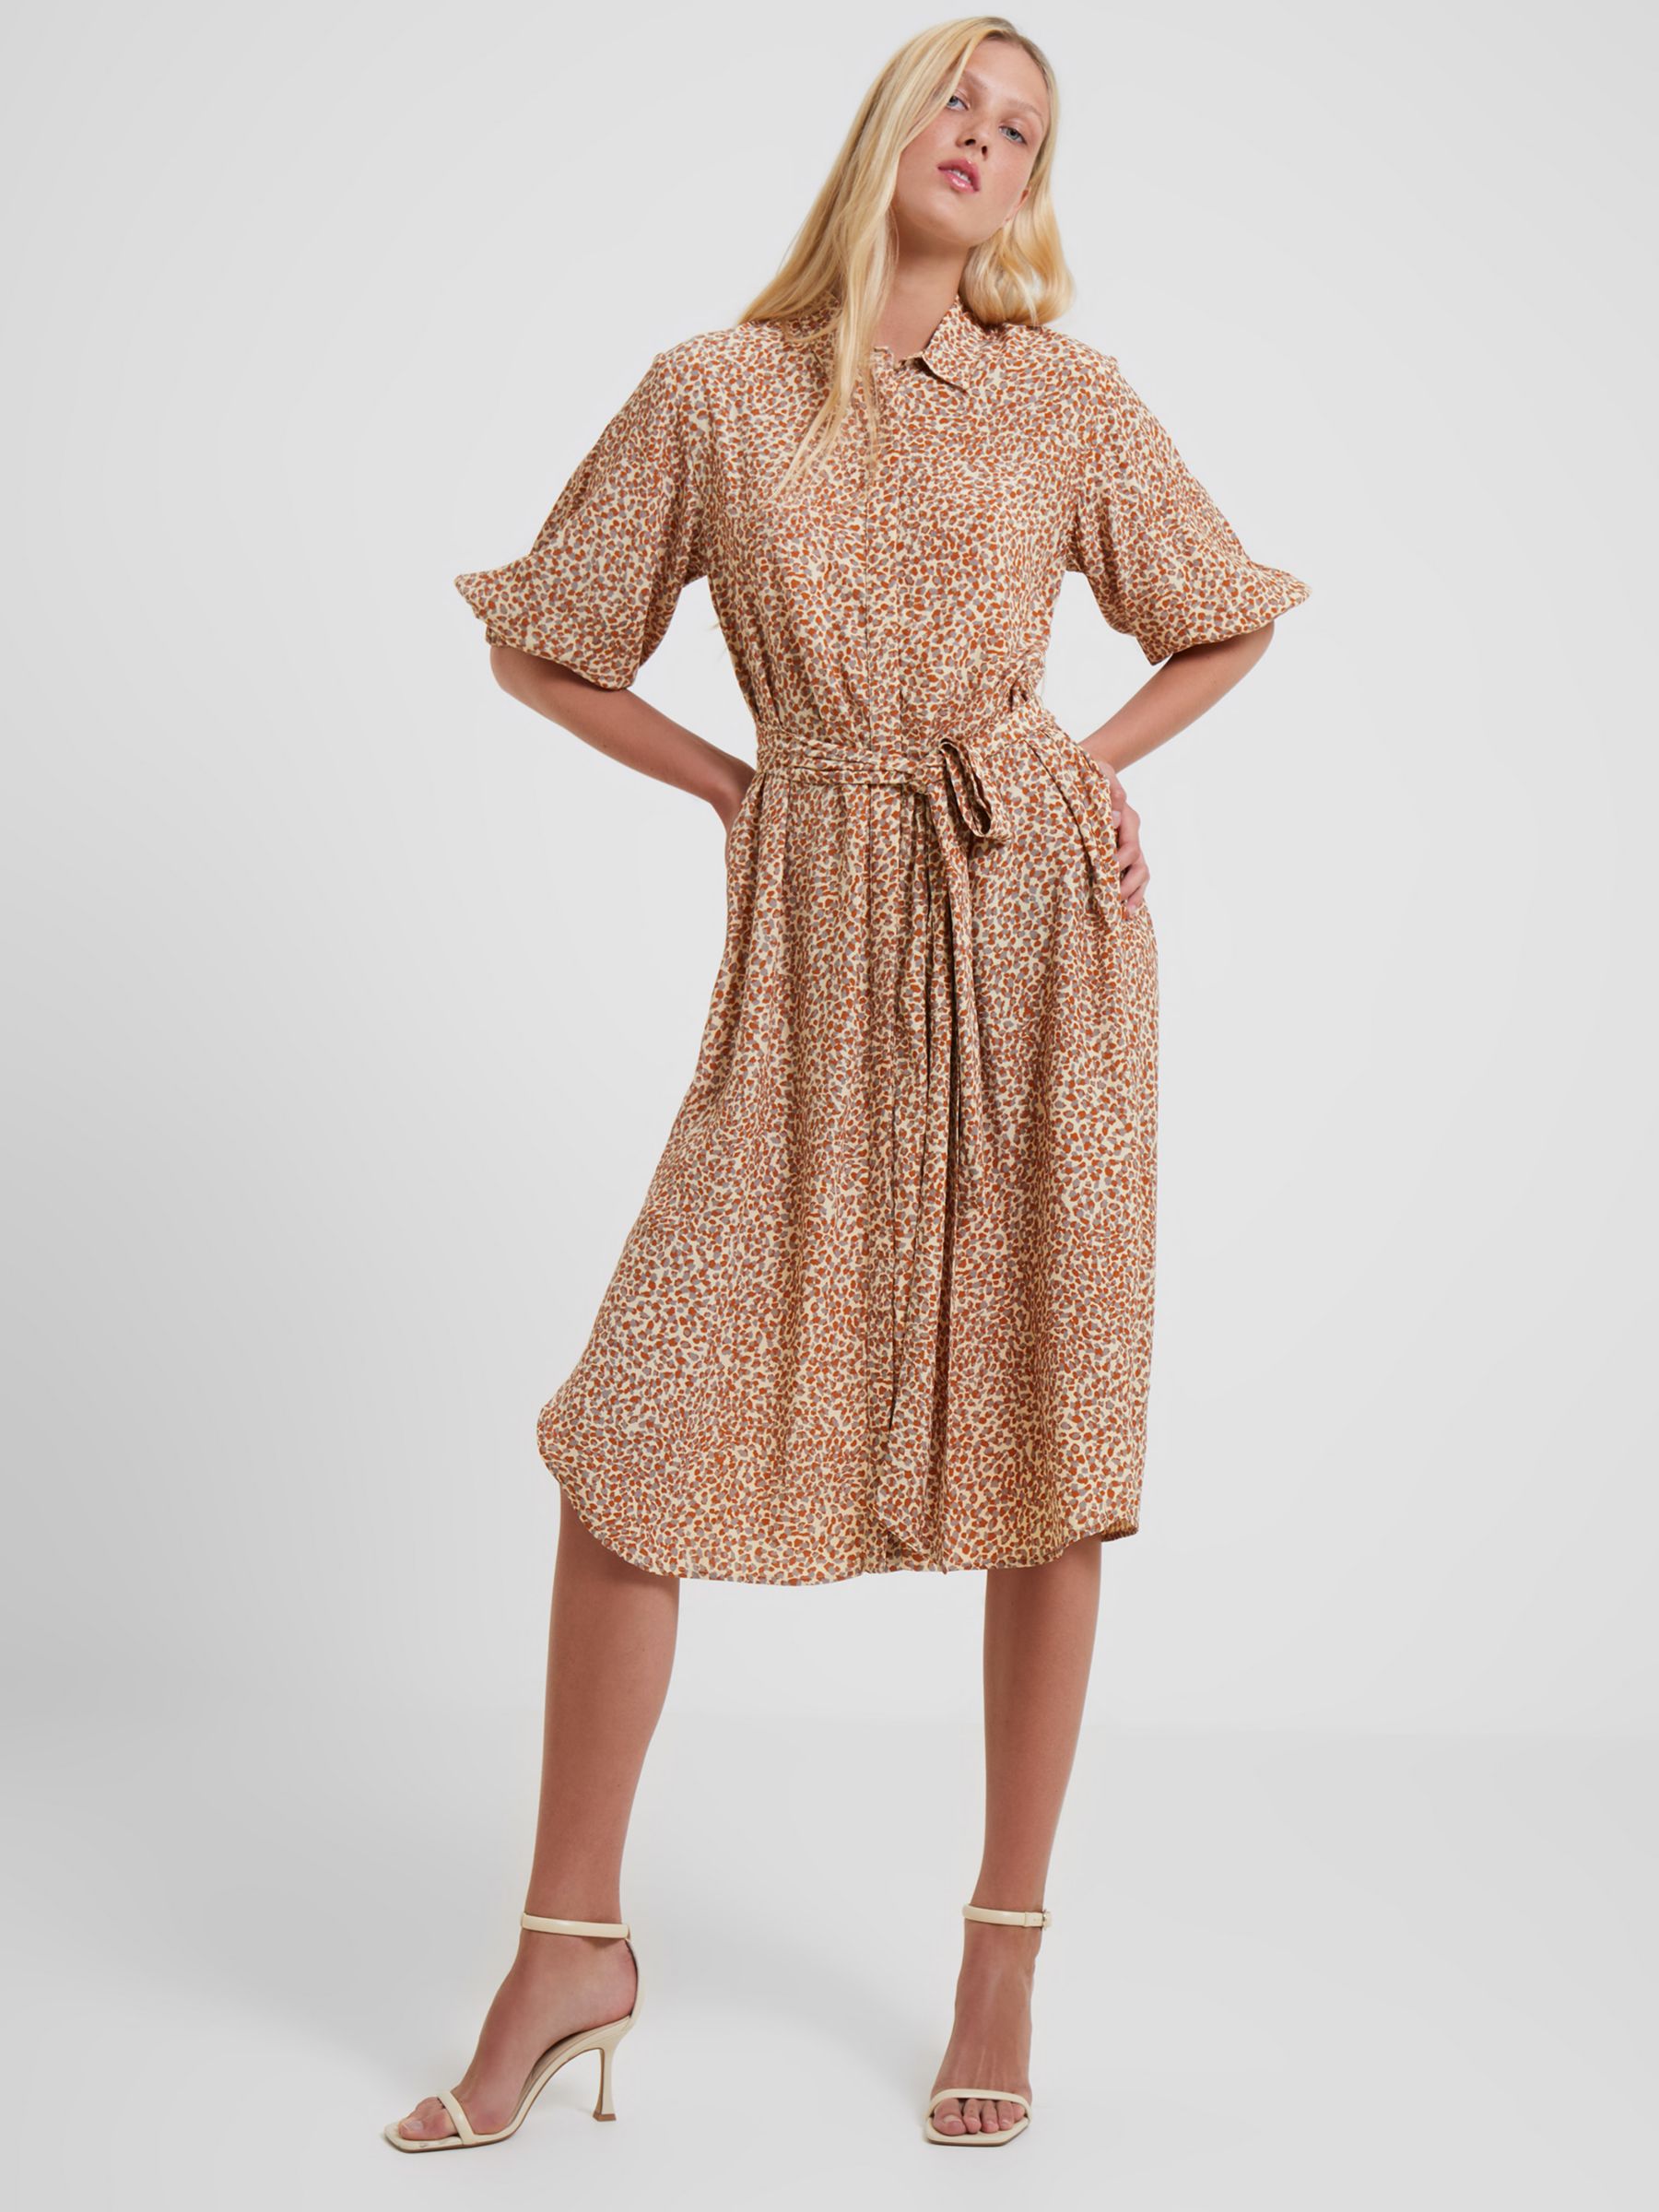 French Connection Cadie Delph Drape Shirt Dress, Shifting Sand, L